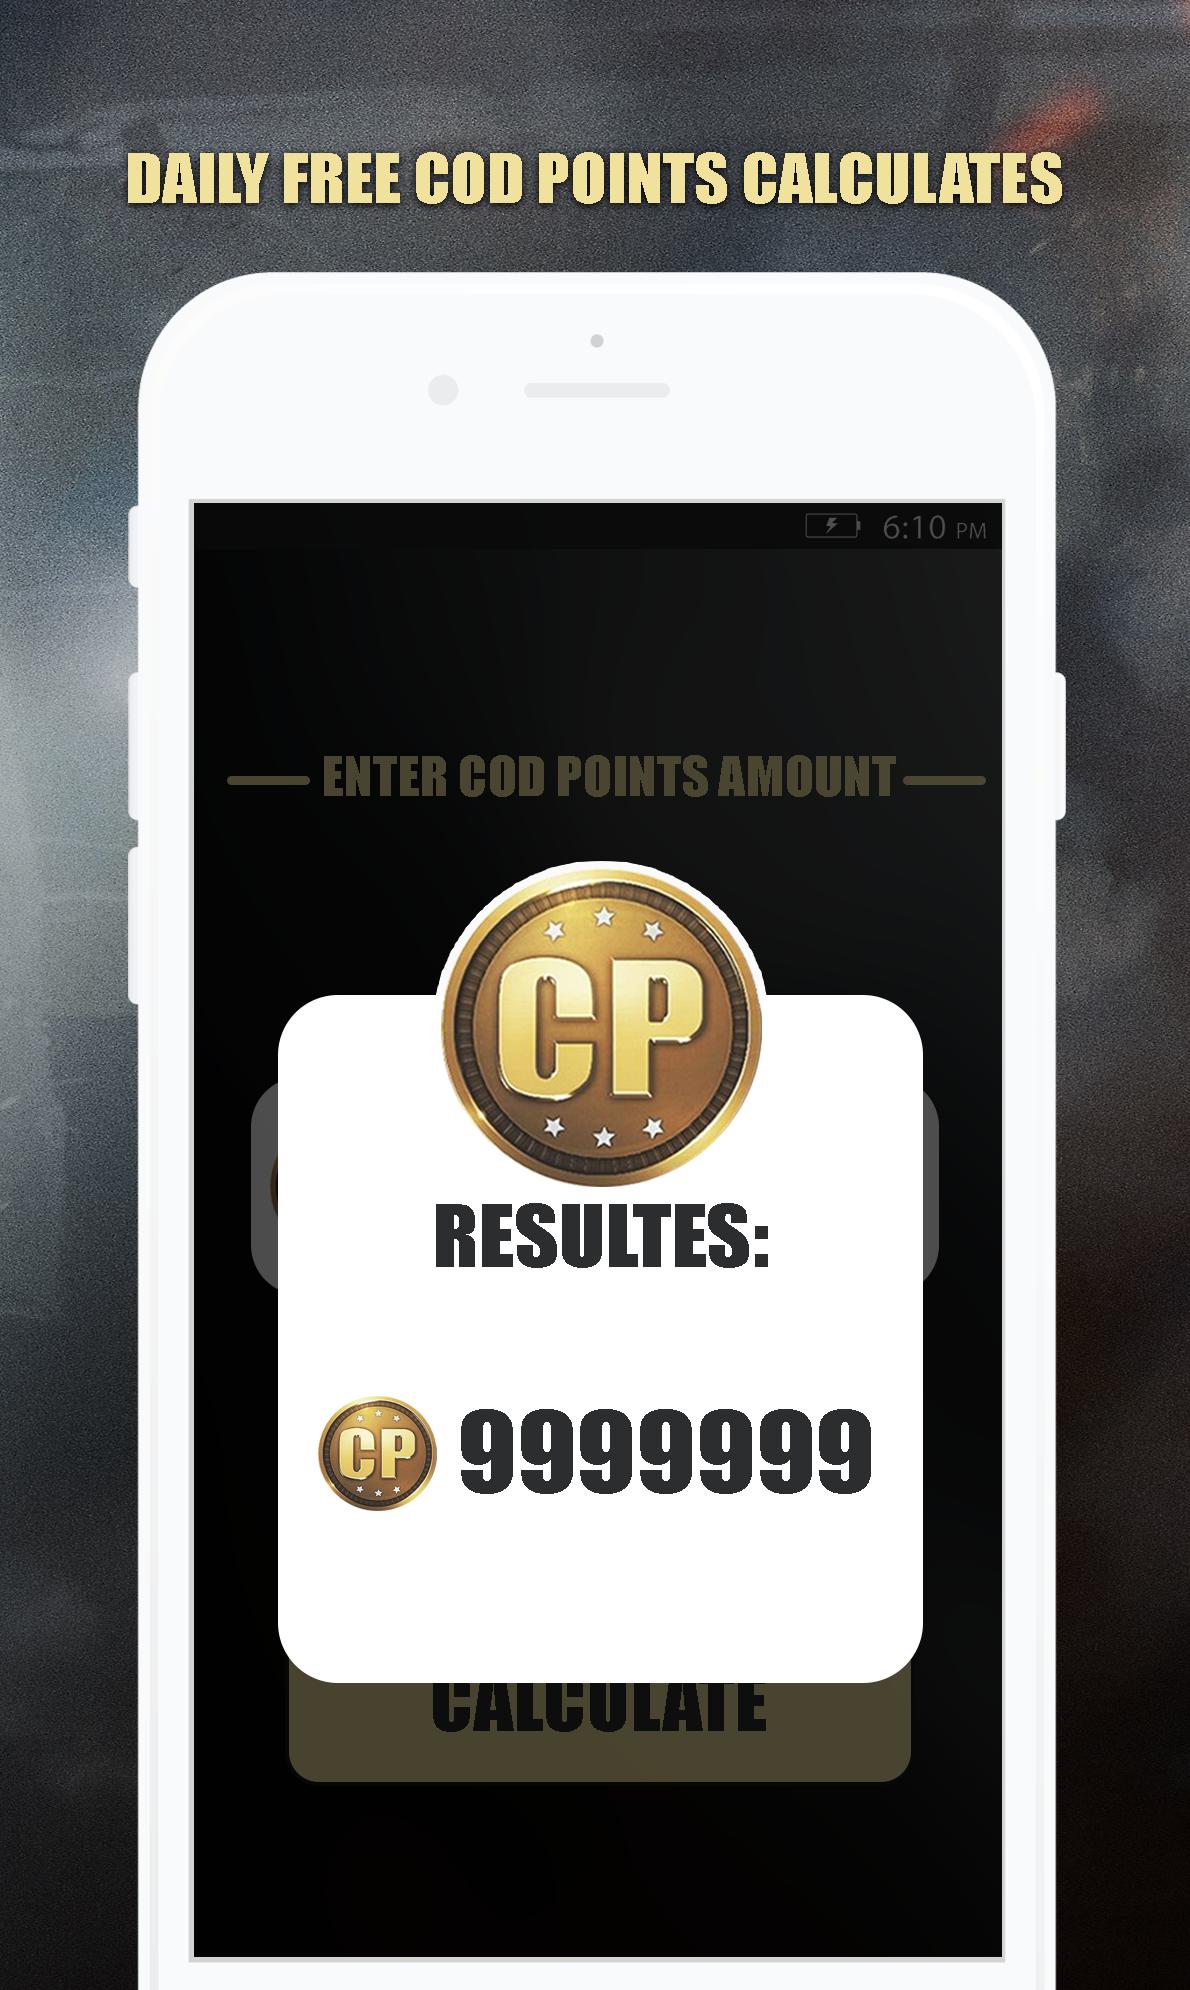 [Unlimited] Free Cod Points & Credits Call Of Duty Mobile Apk Obb File Download Latest Version